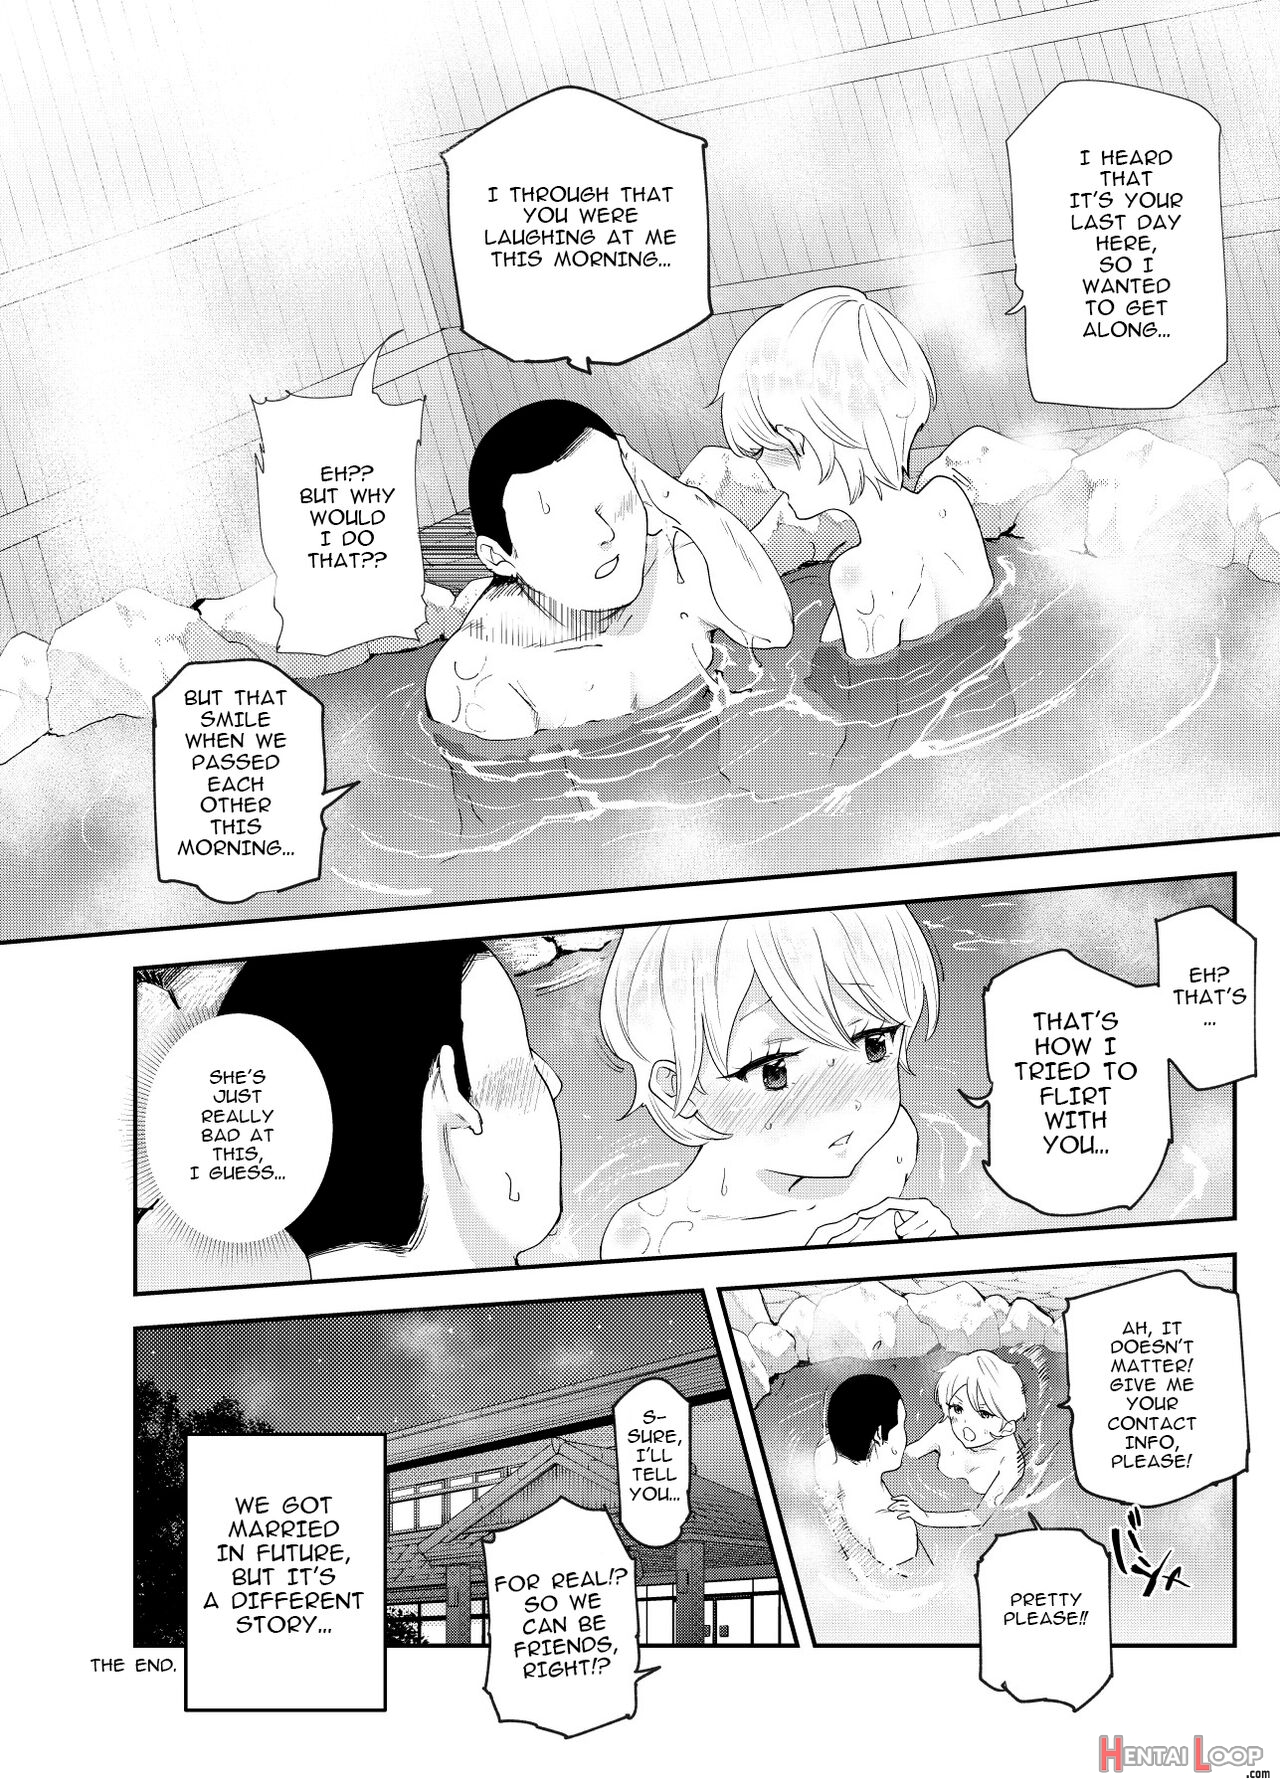 Then You Shouldn't Worry, Because I'm A Girl! Ex! page 17